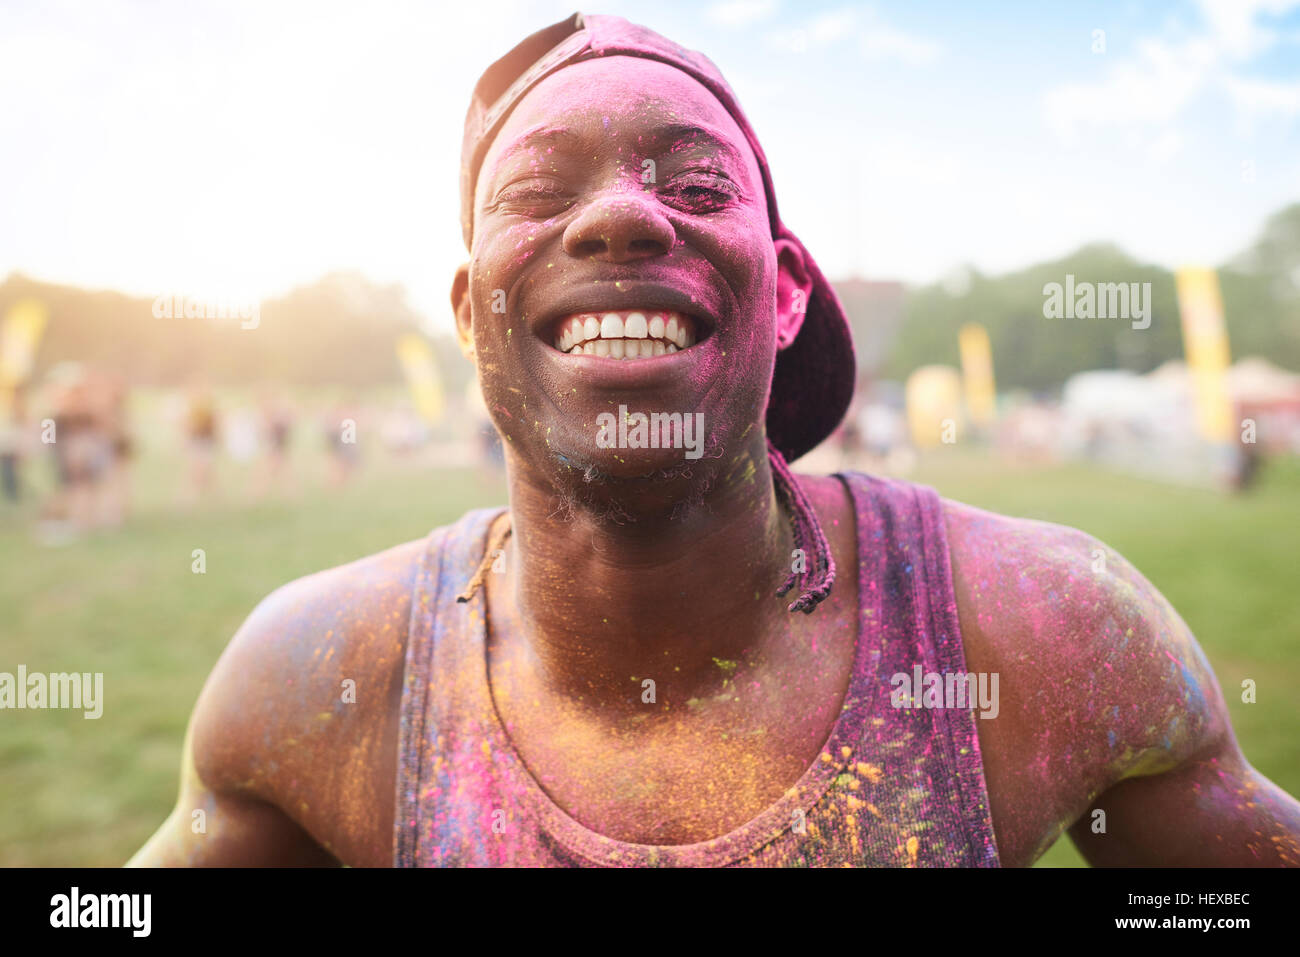 Portrait of young man at festival, covered in colourful powder paint Stock Photo